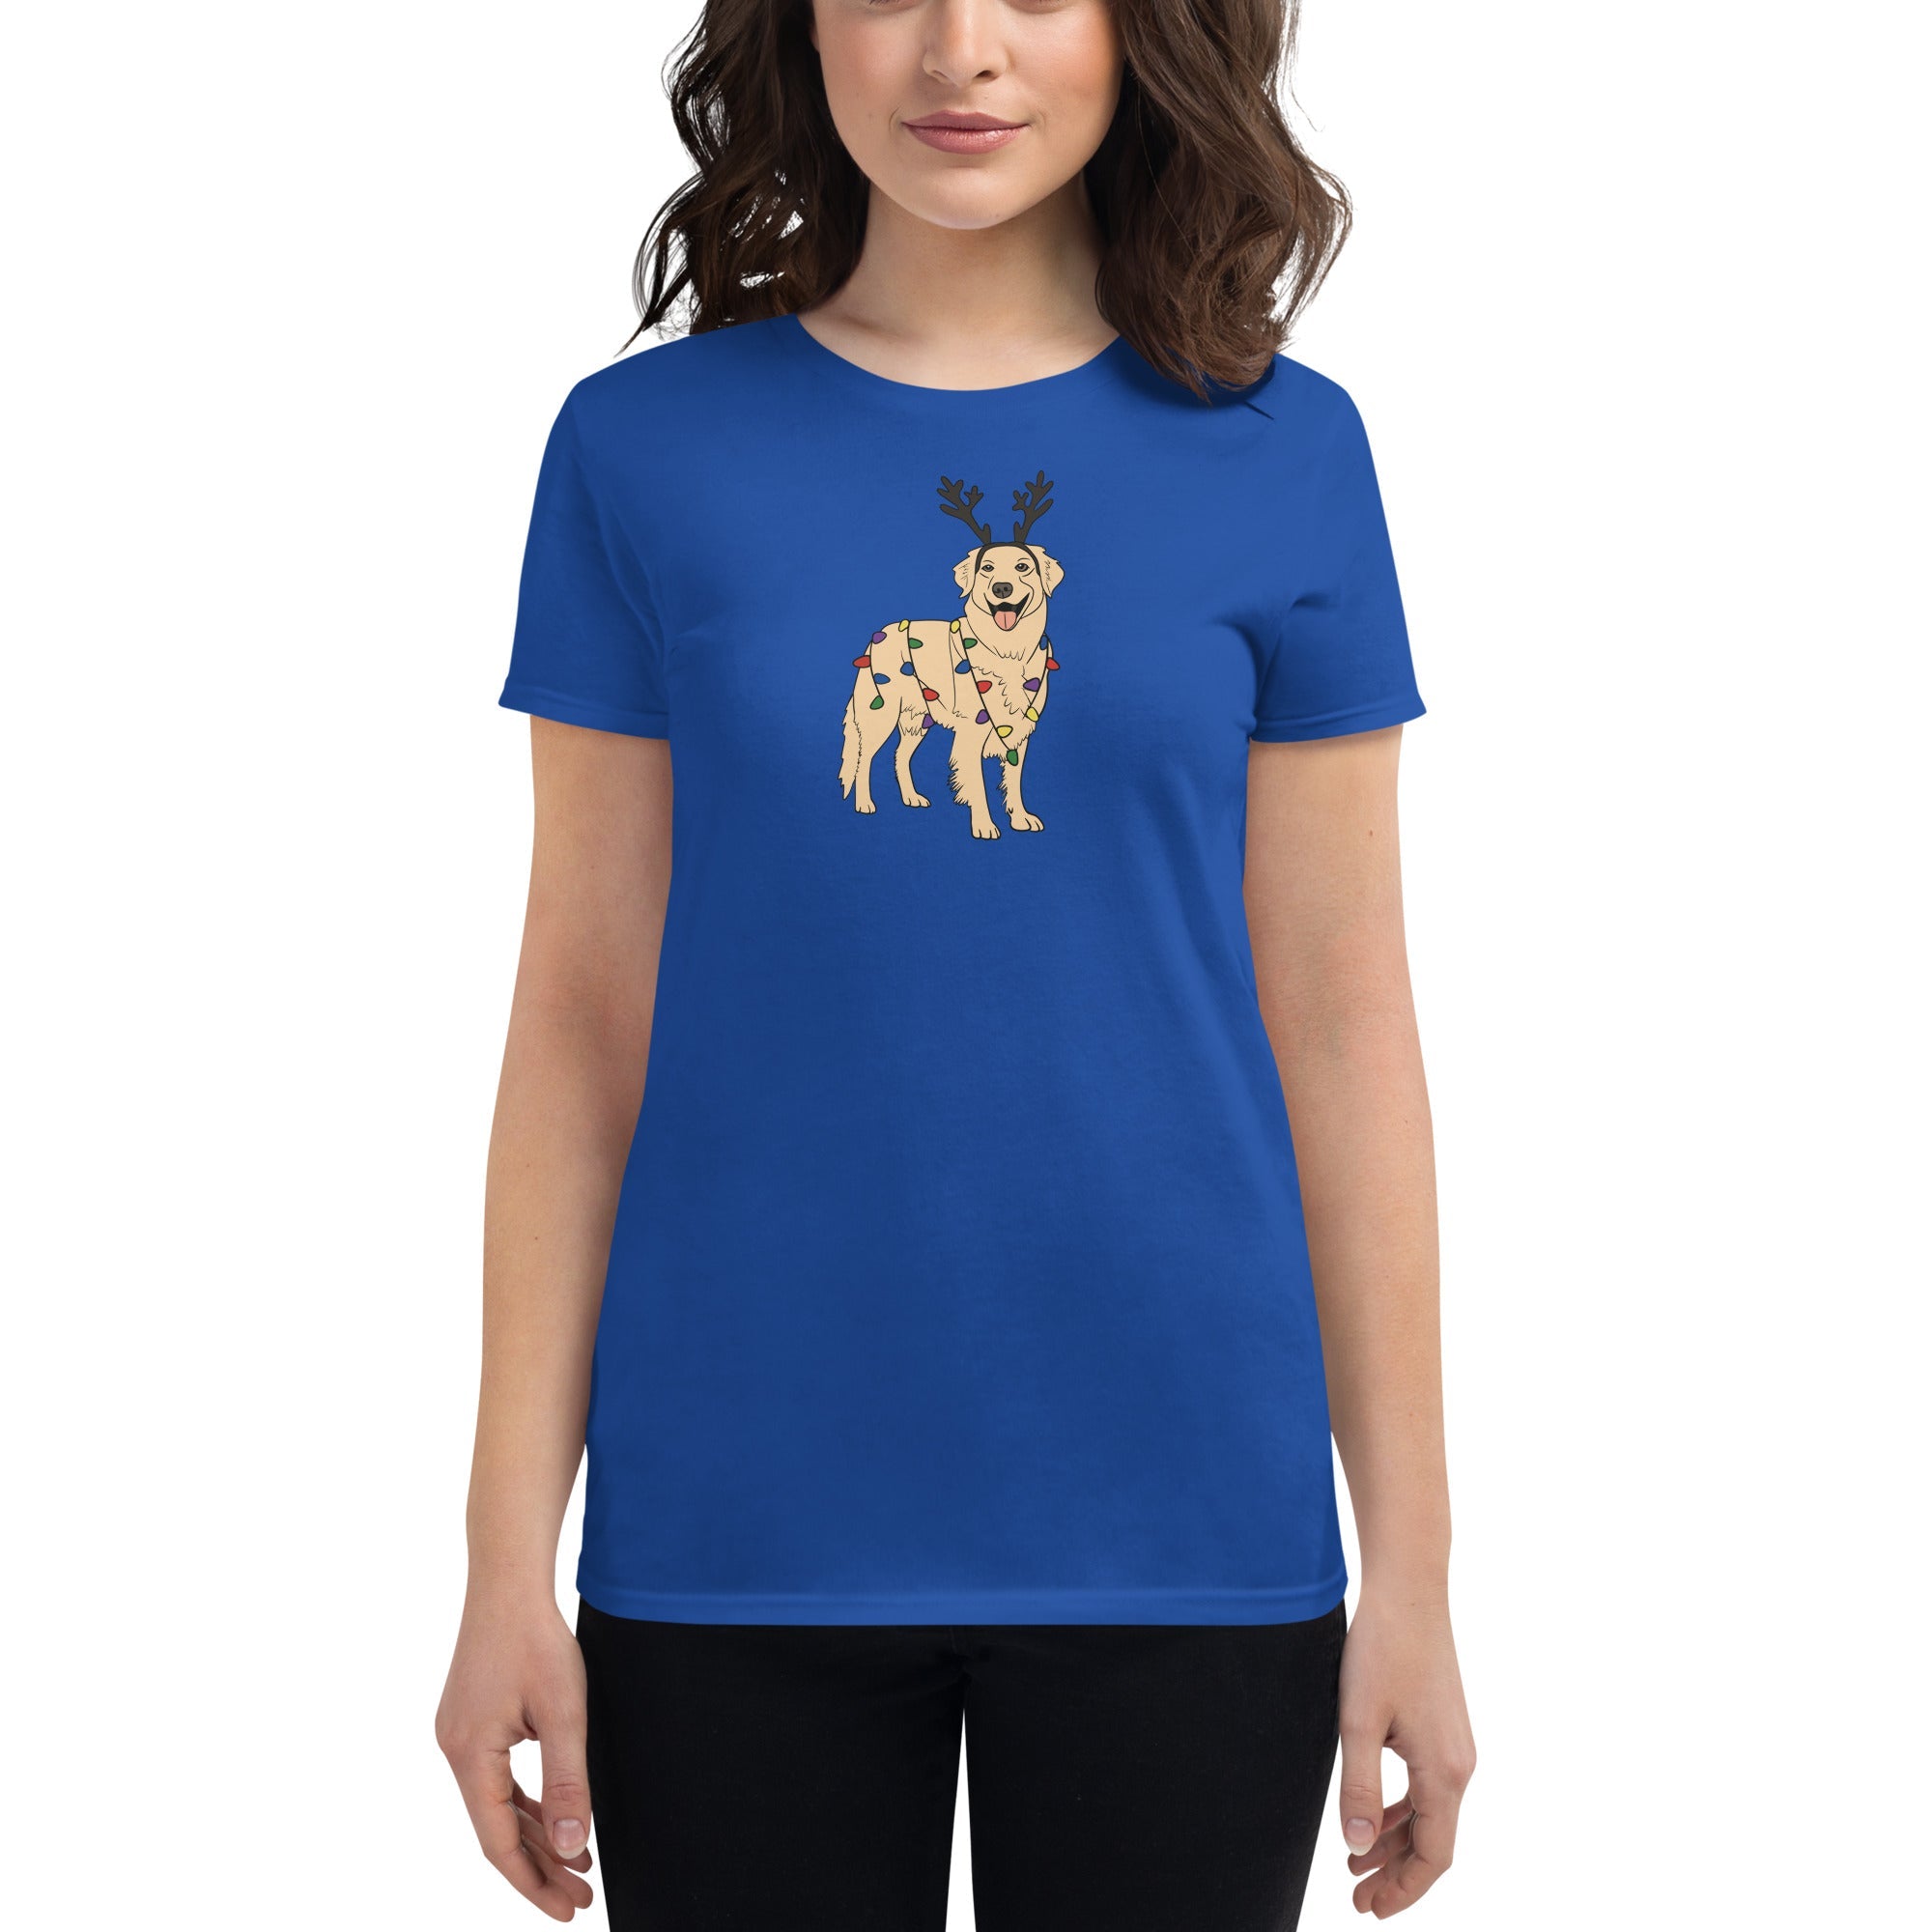 Getting in the Holiday Spirit Women's Fit T-Shirt - TAILWAGS UNLIMITED